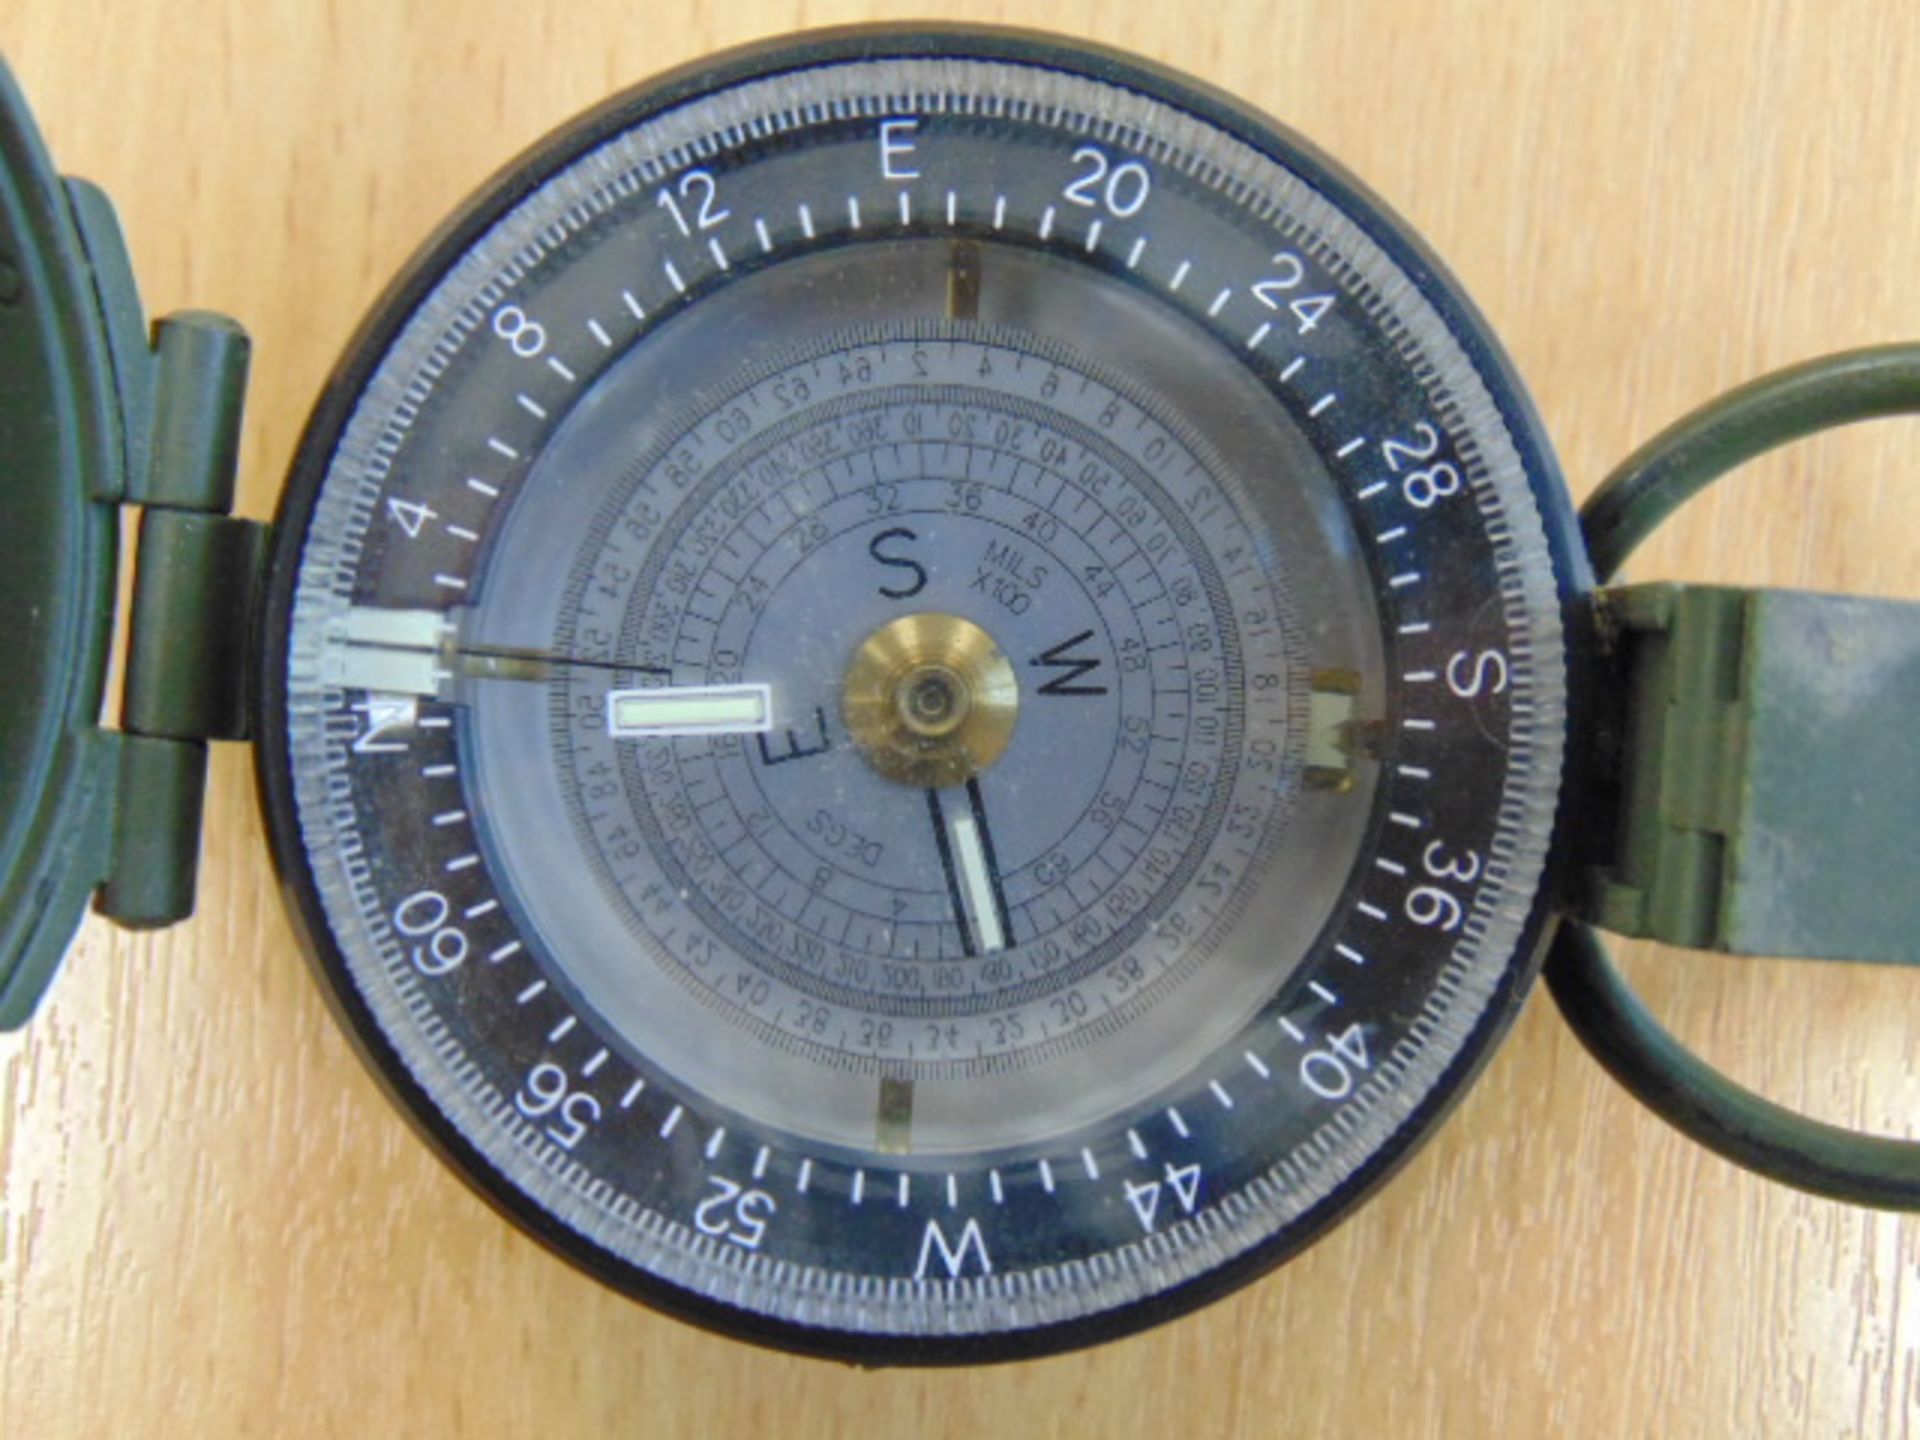 FRANCIS BARKER M88 PRISMATIC COMPASS C/W LANYARD - Image 5 of 8